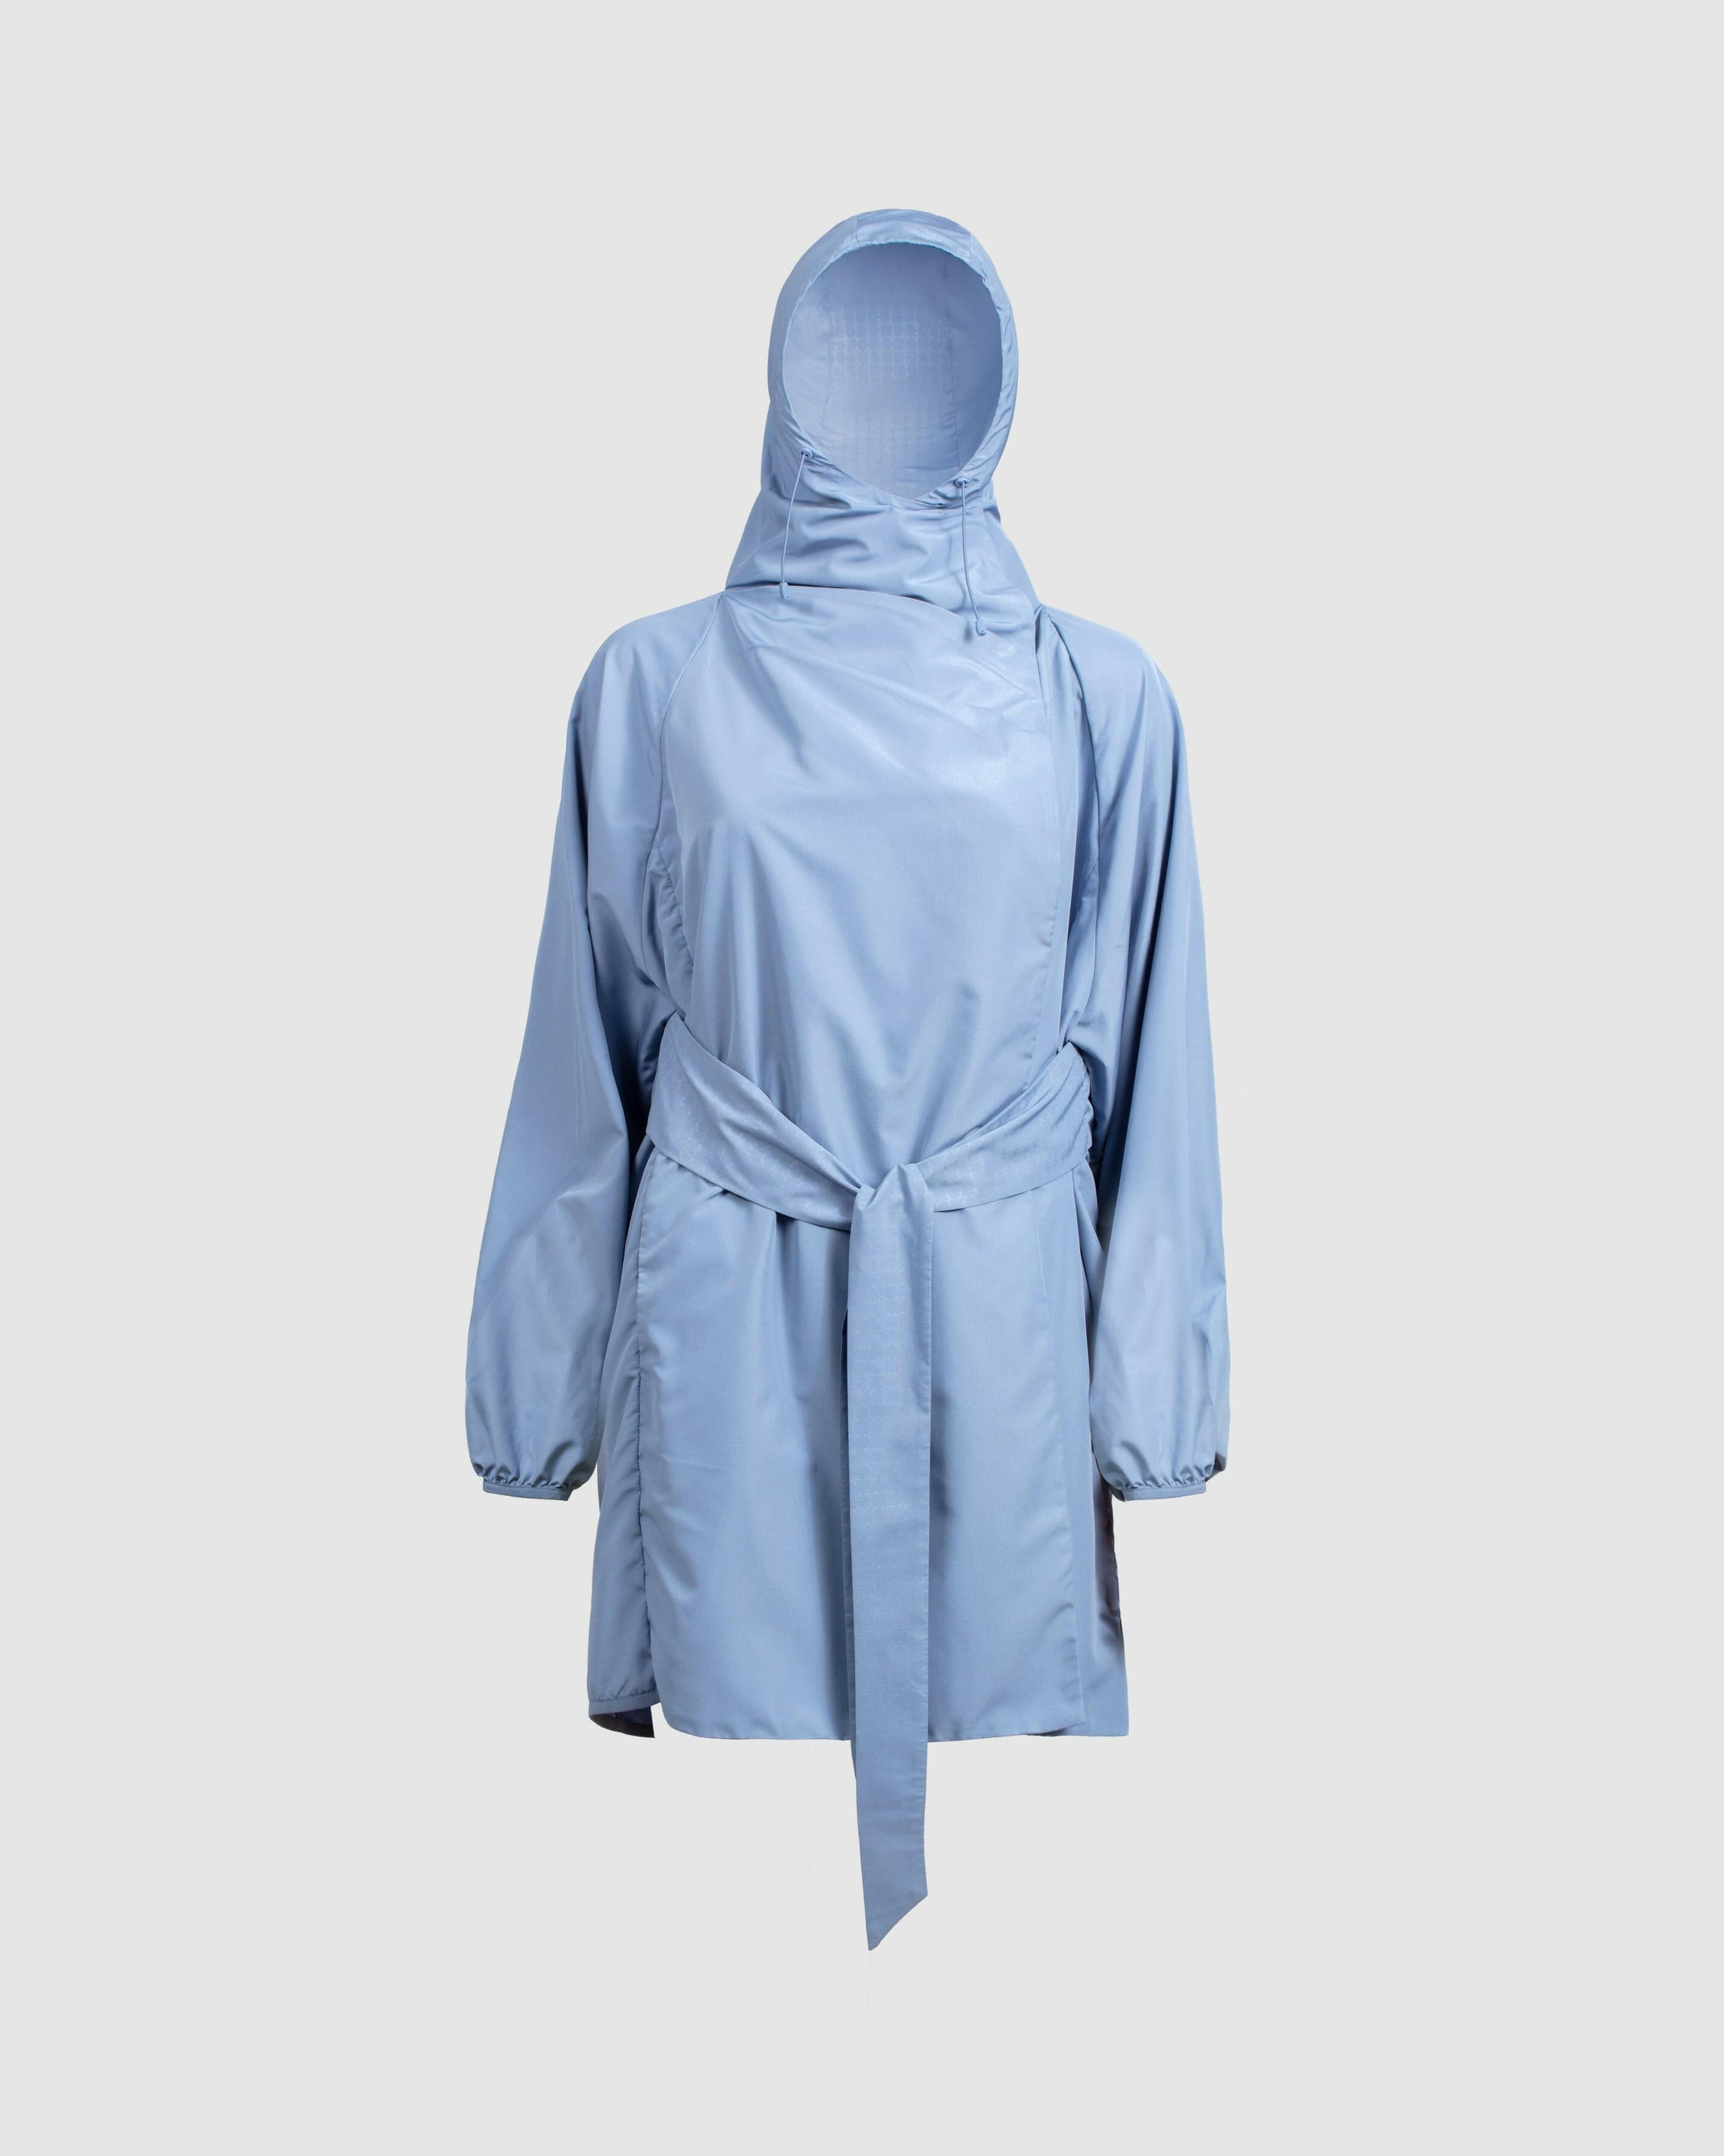 A lightweight Infinity Blue COOLDOWN coat by Qynda with a hood, displayed against a neutral background.